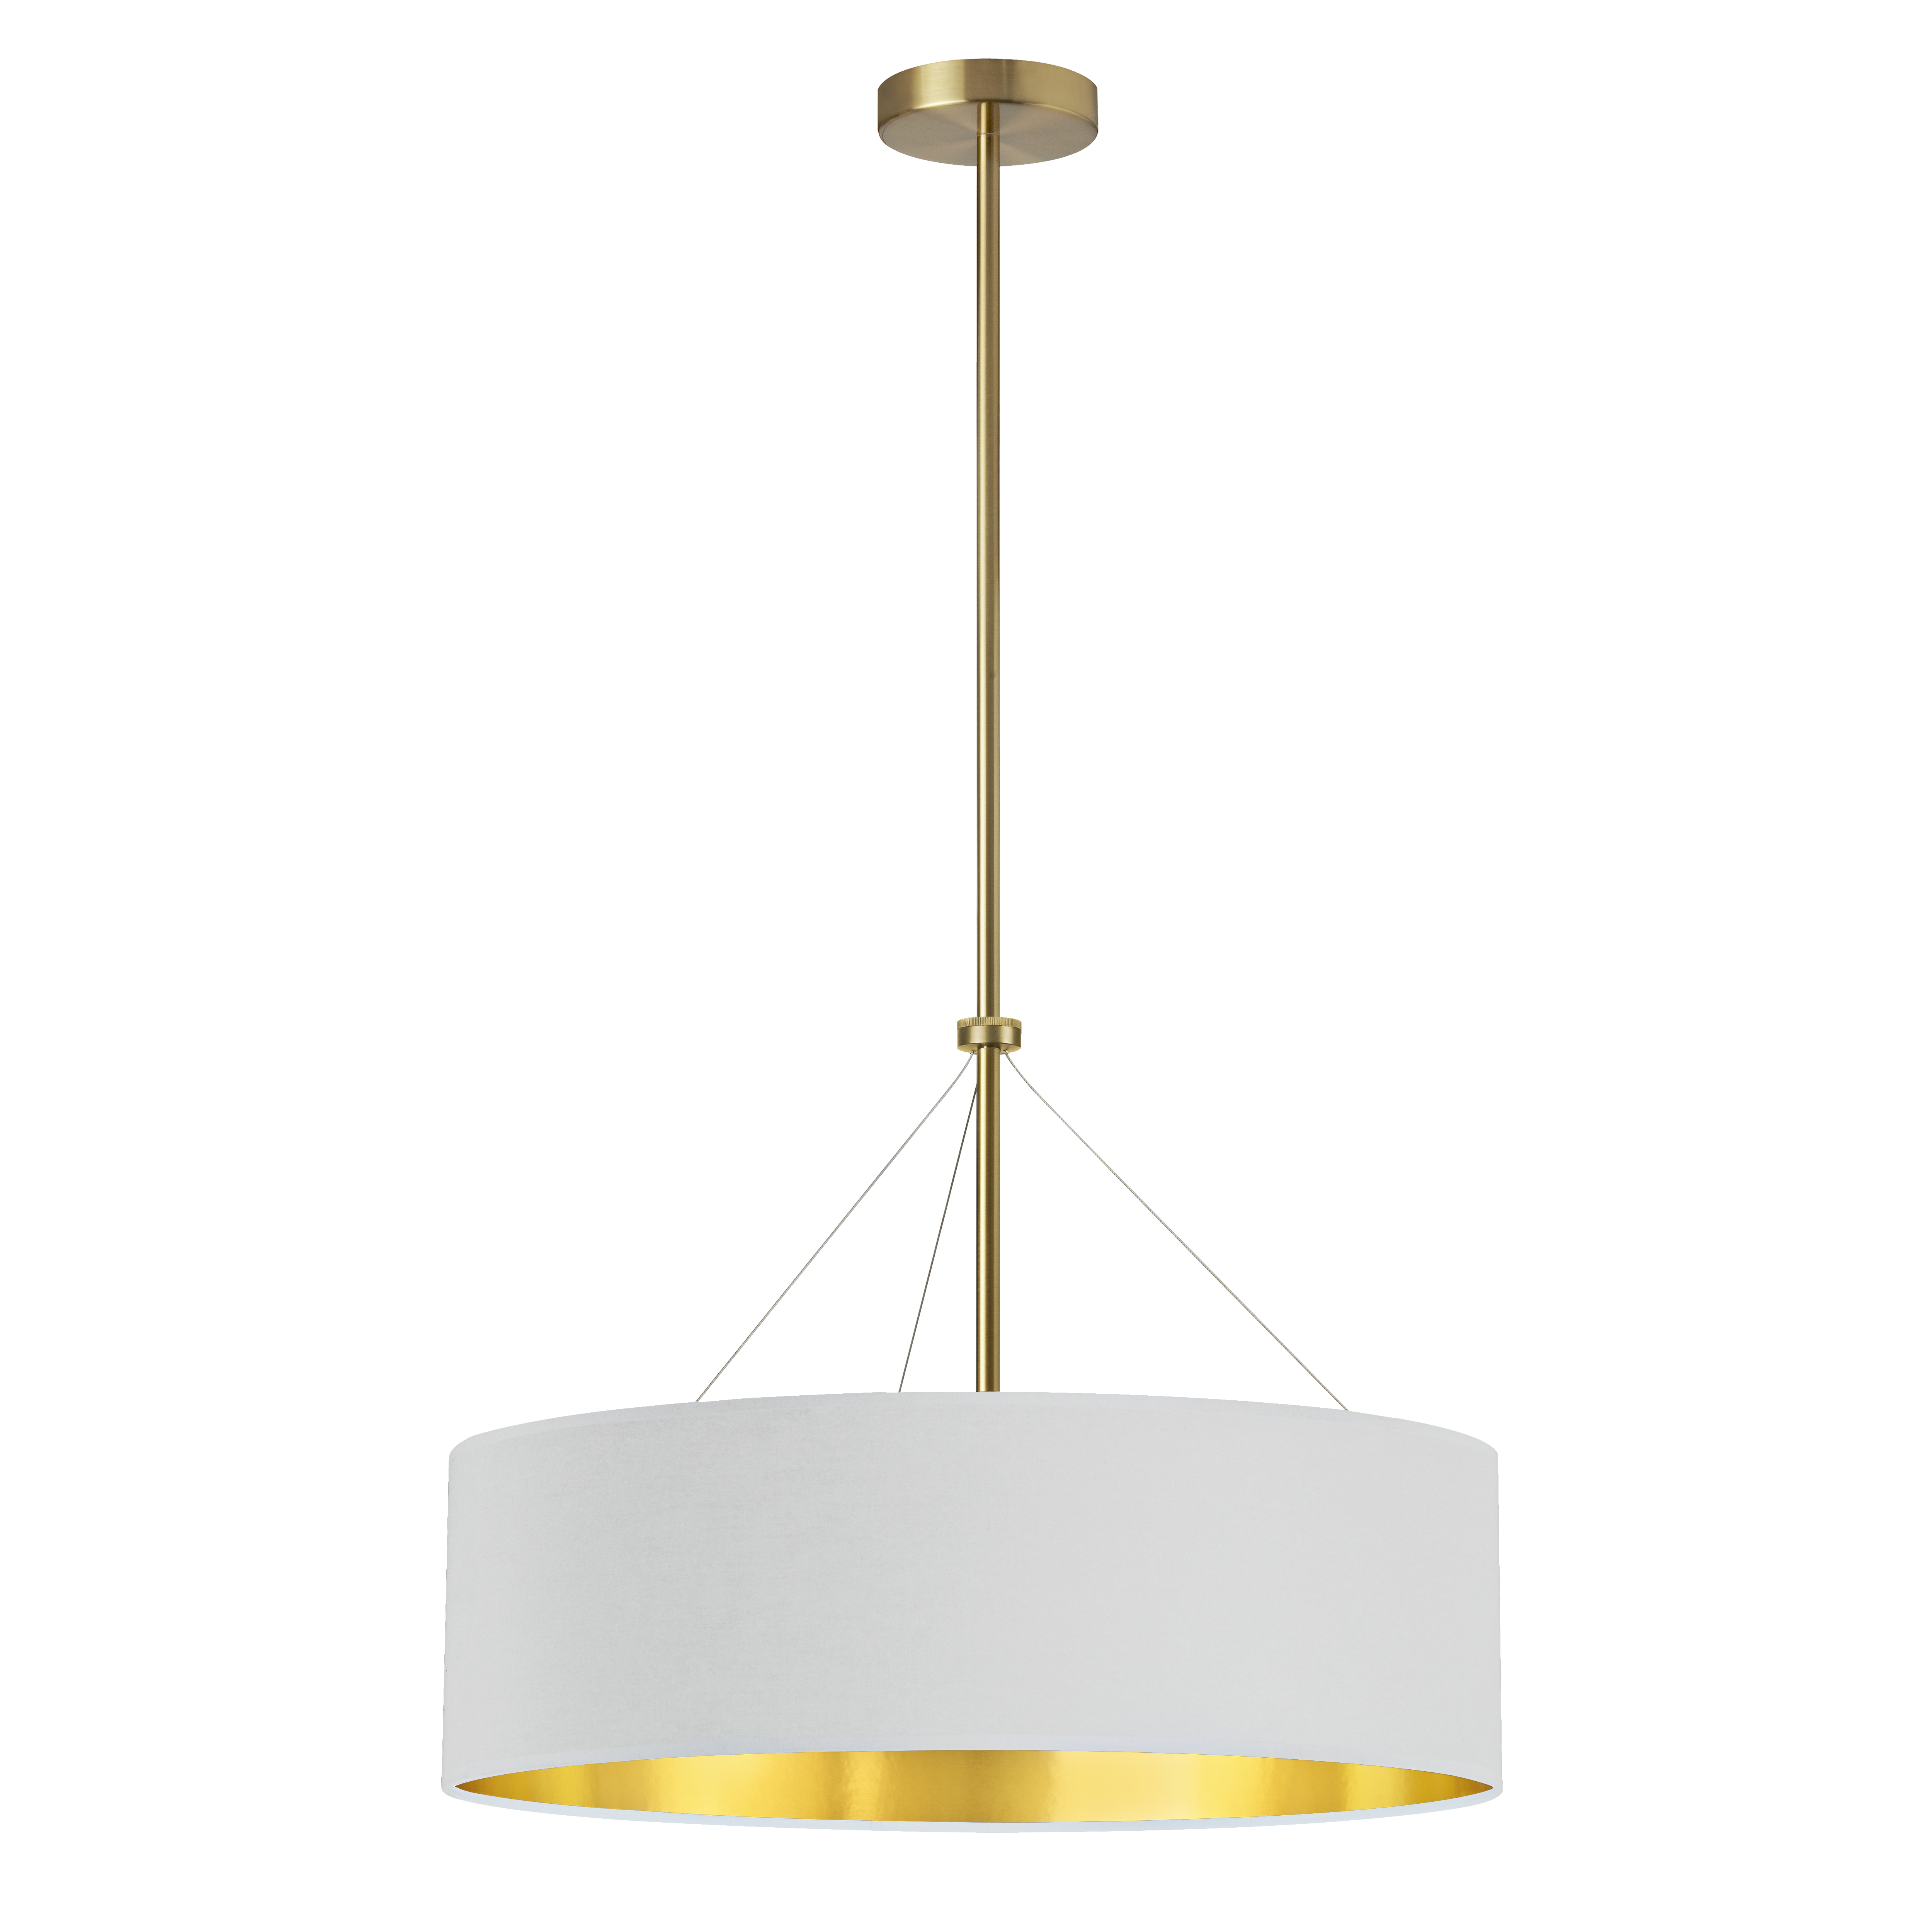 A shimmering gold finish interior and a slim profile create the allure of the Pallavi family of lighting. It adds a touch of contemporary glamour to your home. A metal drop and frame in your choice of finish hold a slim drum style fabric shade with a contrasting gold interior surface. It's a look that will garner attention, while also complementing the surrounding furnishings. With its elegant allure, the Pallavi family of lighting is perfect for the main rooms of your home, including kitchen, living and dining rooms.